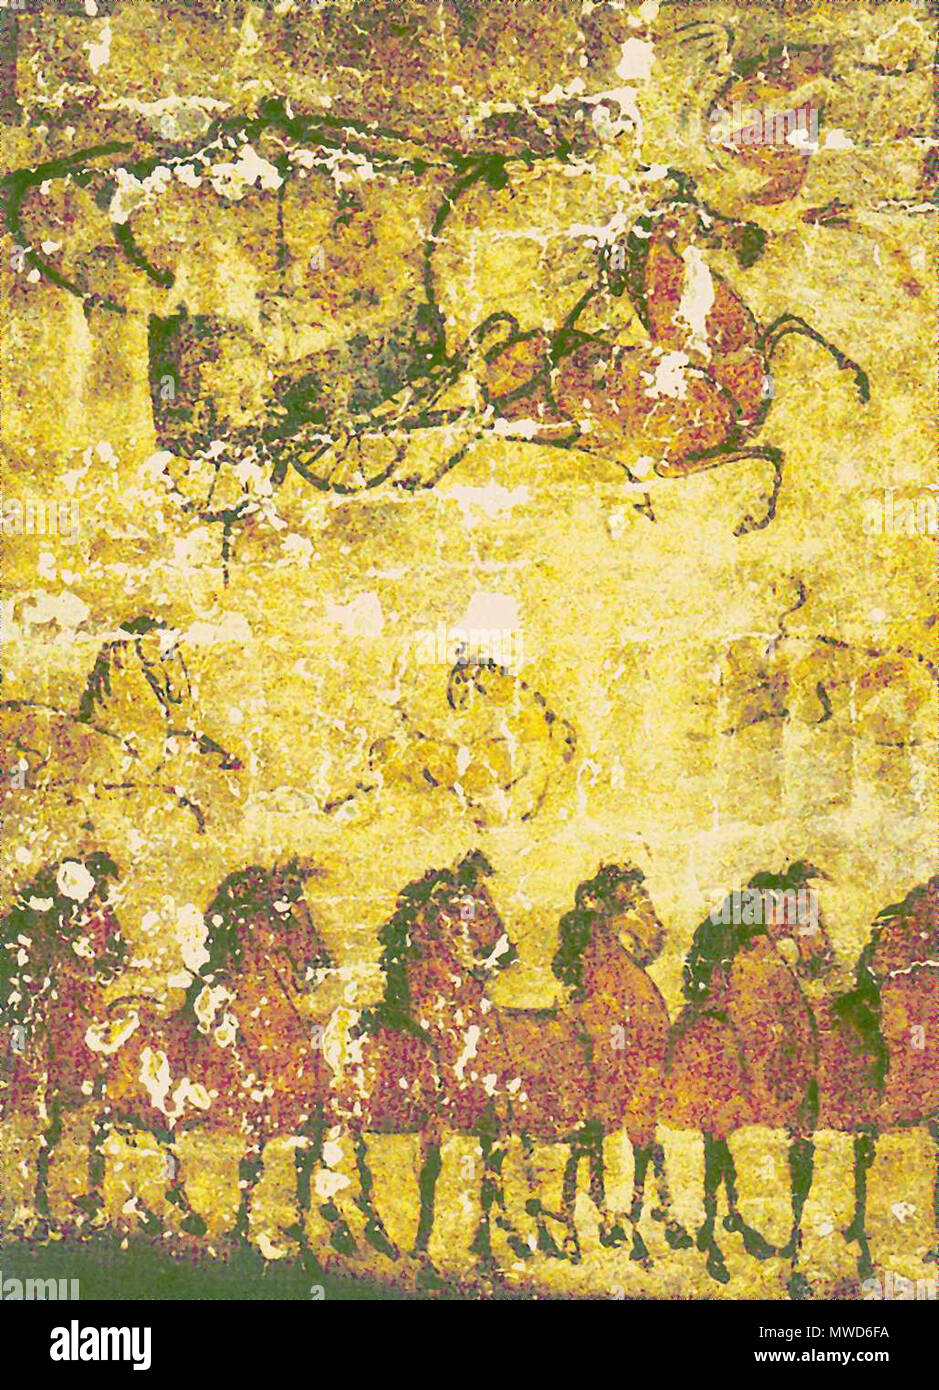 . Carts and horses going out, 137cm x 201 cm, Eastern Han Dynasty, China; one of 57 murals from the Nei Menggu Helingeer (or Holingor) Tomb in Inner Mongolia. Buried at the tomb as a prominent official, landowner, and colonel of the Wuhuan Army. This mural is one of many found at the site, including murals depicting agrarian labor at his wealthy manor home. 25–220 CE. Anonymous Han Dynasty artist 264 Han Tomb Mural, Horses and Carts Stock Photo